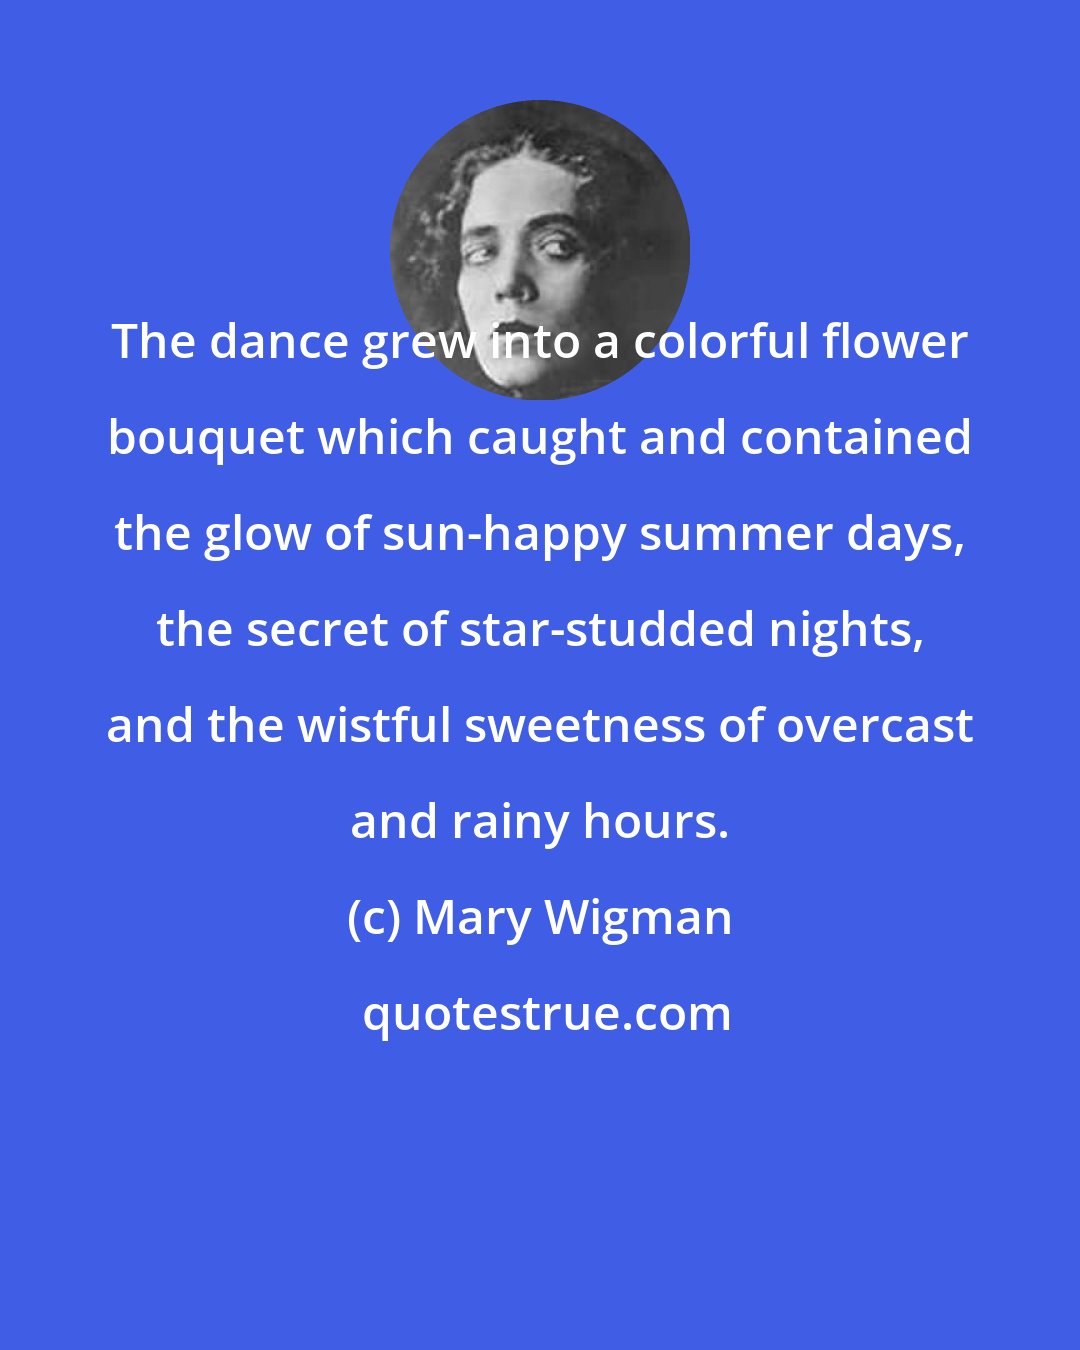 Mary Wigman: The dance grew into a colorful flower bouquet which caught and contained the glow of sun-happy summer days, the secret of star-studded nights, and the wistful sweetness of overcast and rainy hours.